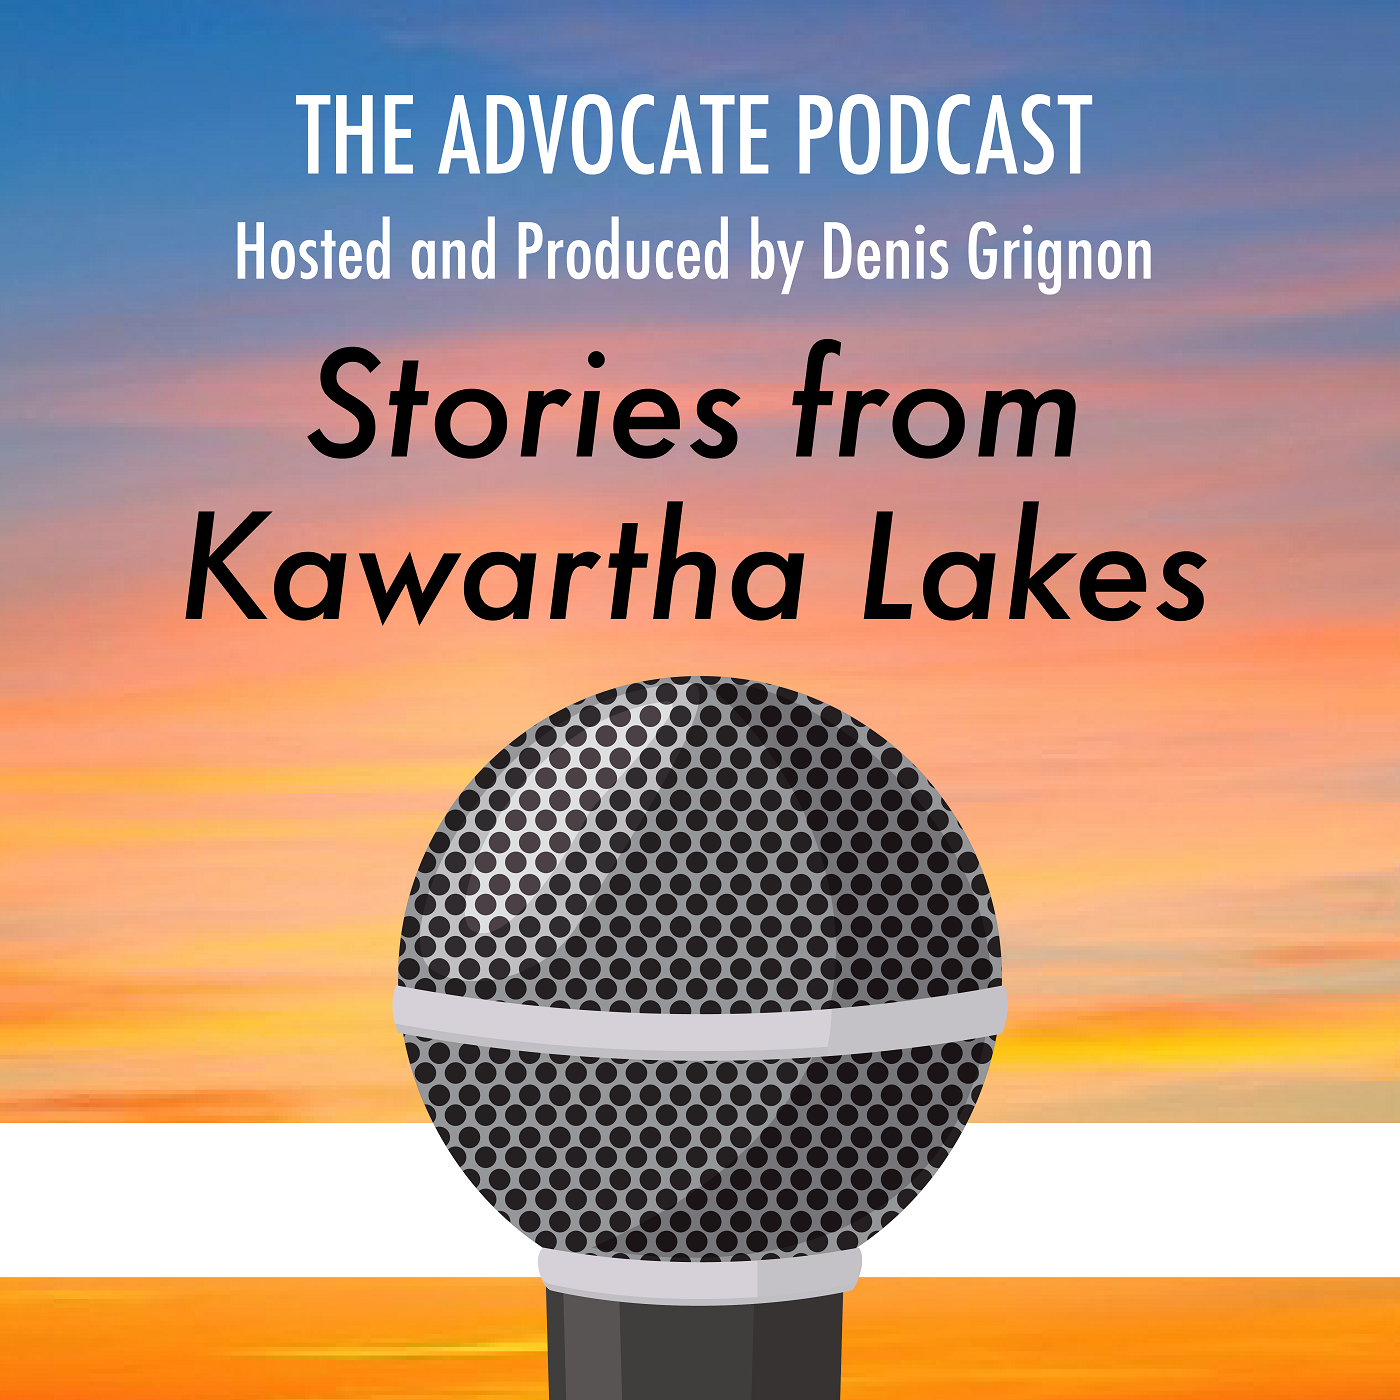 The Advocate Podcast – Stories from Kawartha Lakes